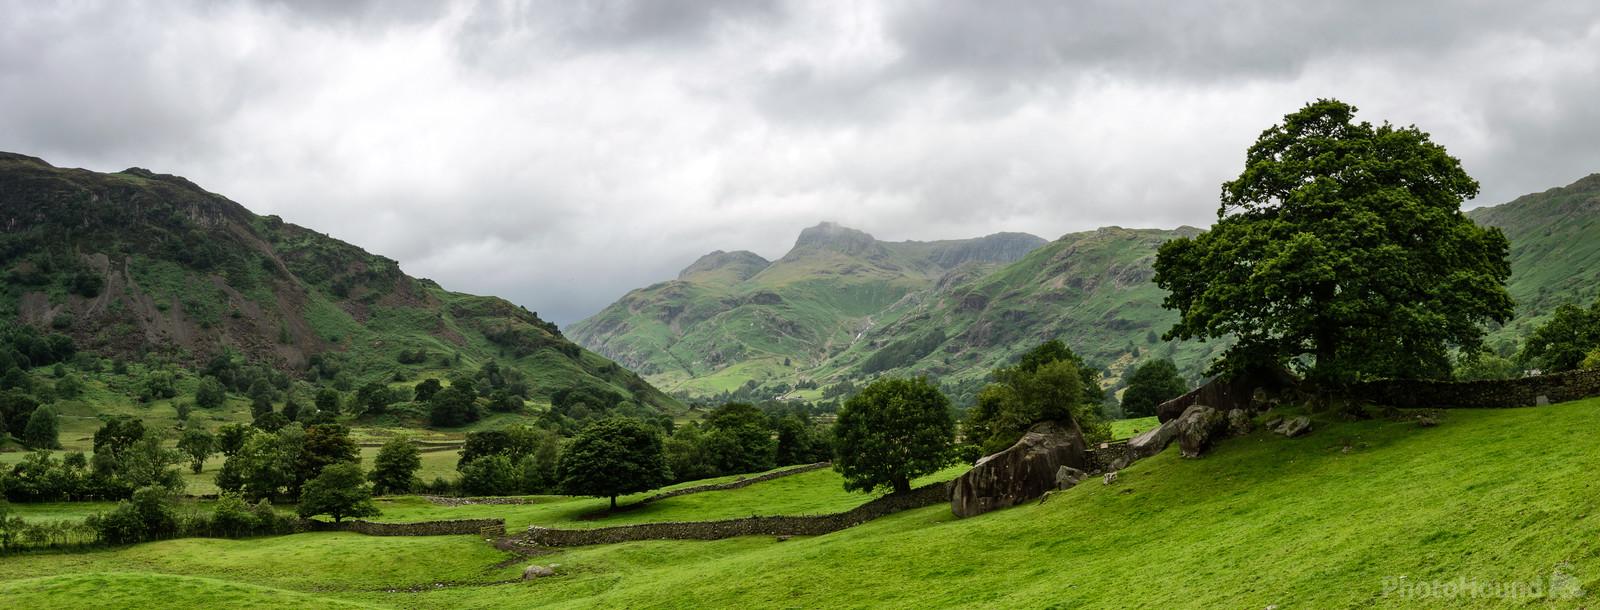 Image of Langdale Boulders, Lake District by Richard Lizzimore